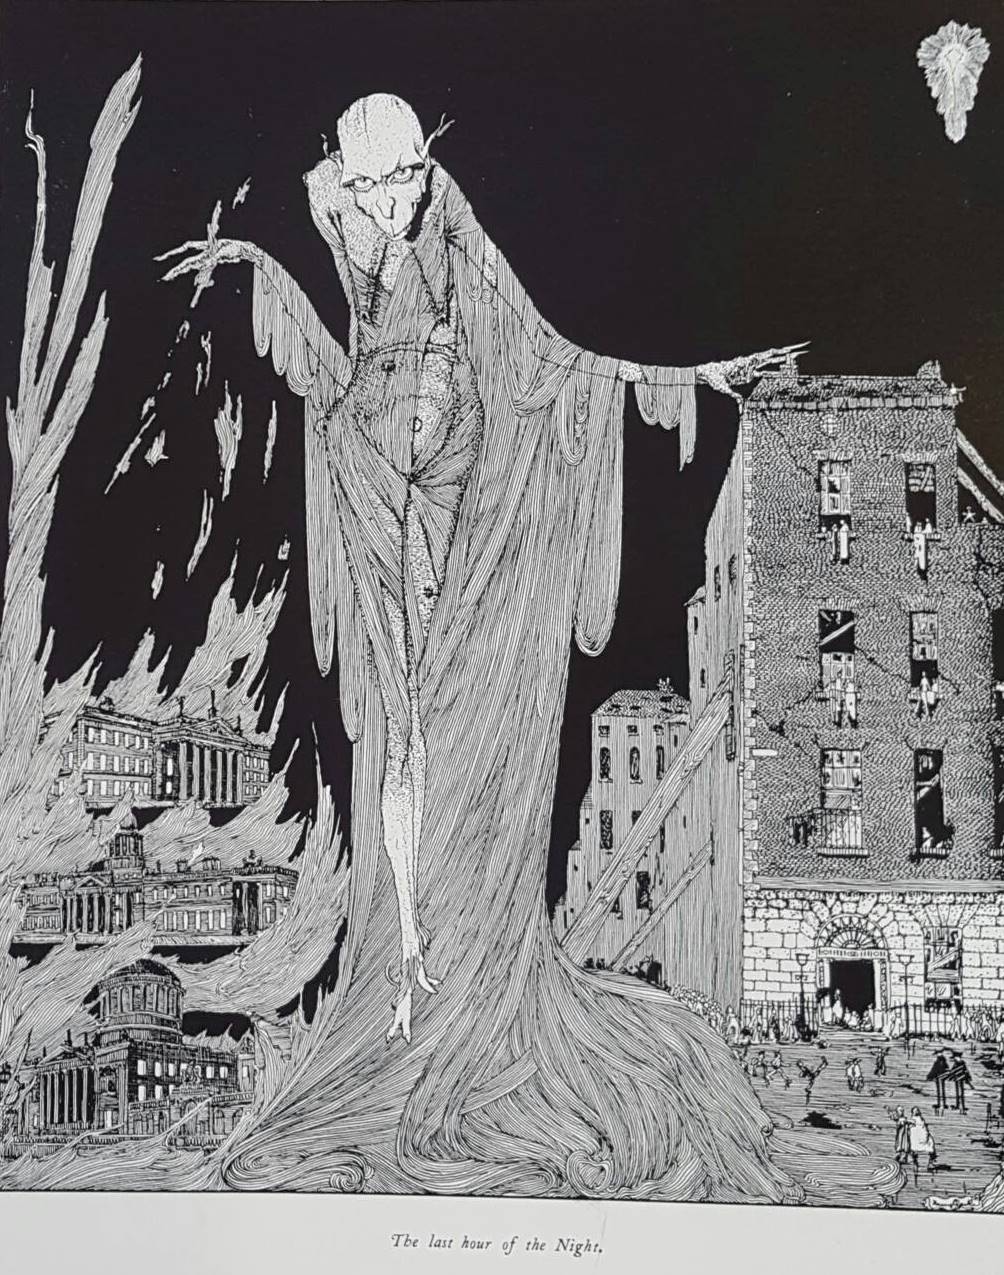 'The last hour of the night' frontispiece illustrated by Harry Clarke